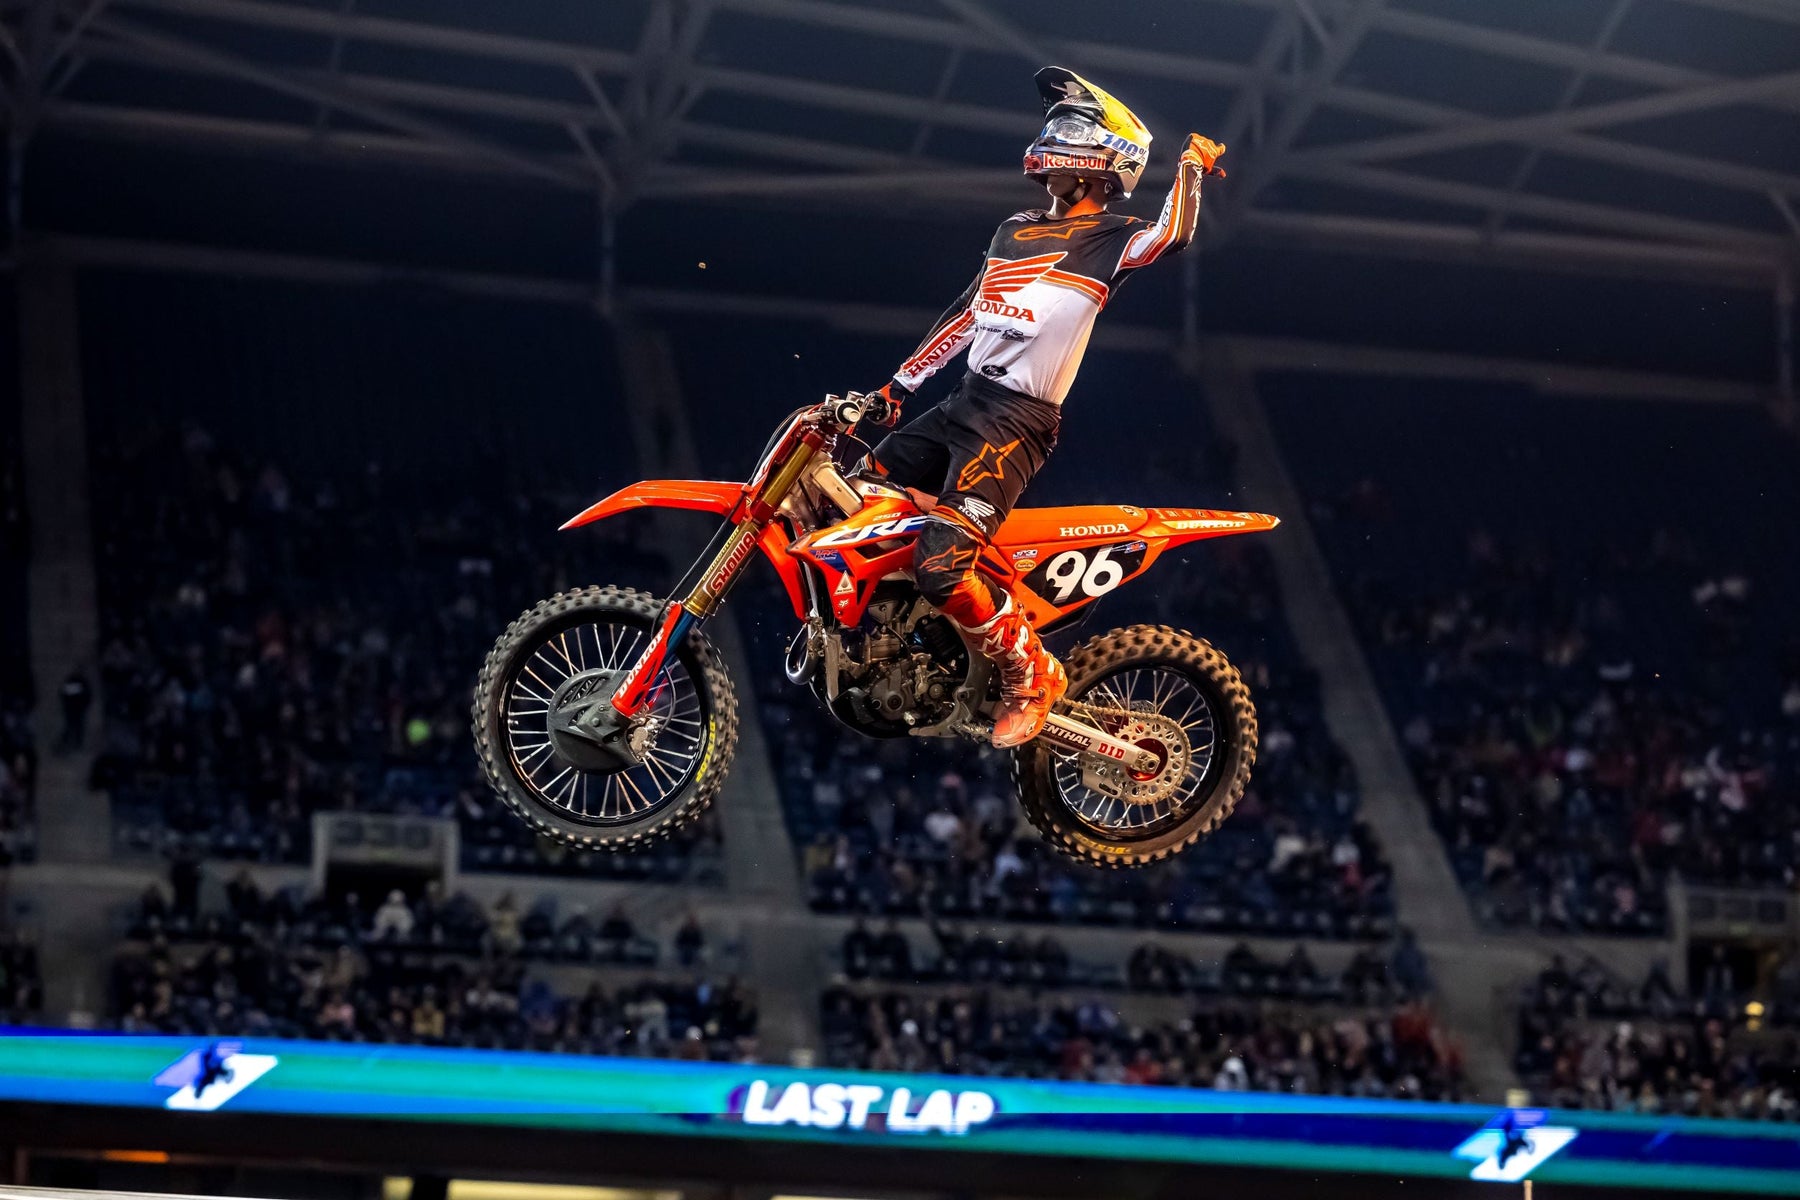 HUNTER LAWRENCE WINS AMA 250 WEST SX MAIN AS ALPINESTARS SWEEP PODIUM IN SEATTLE